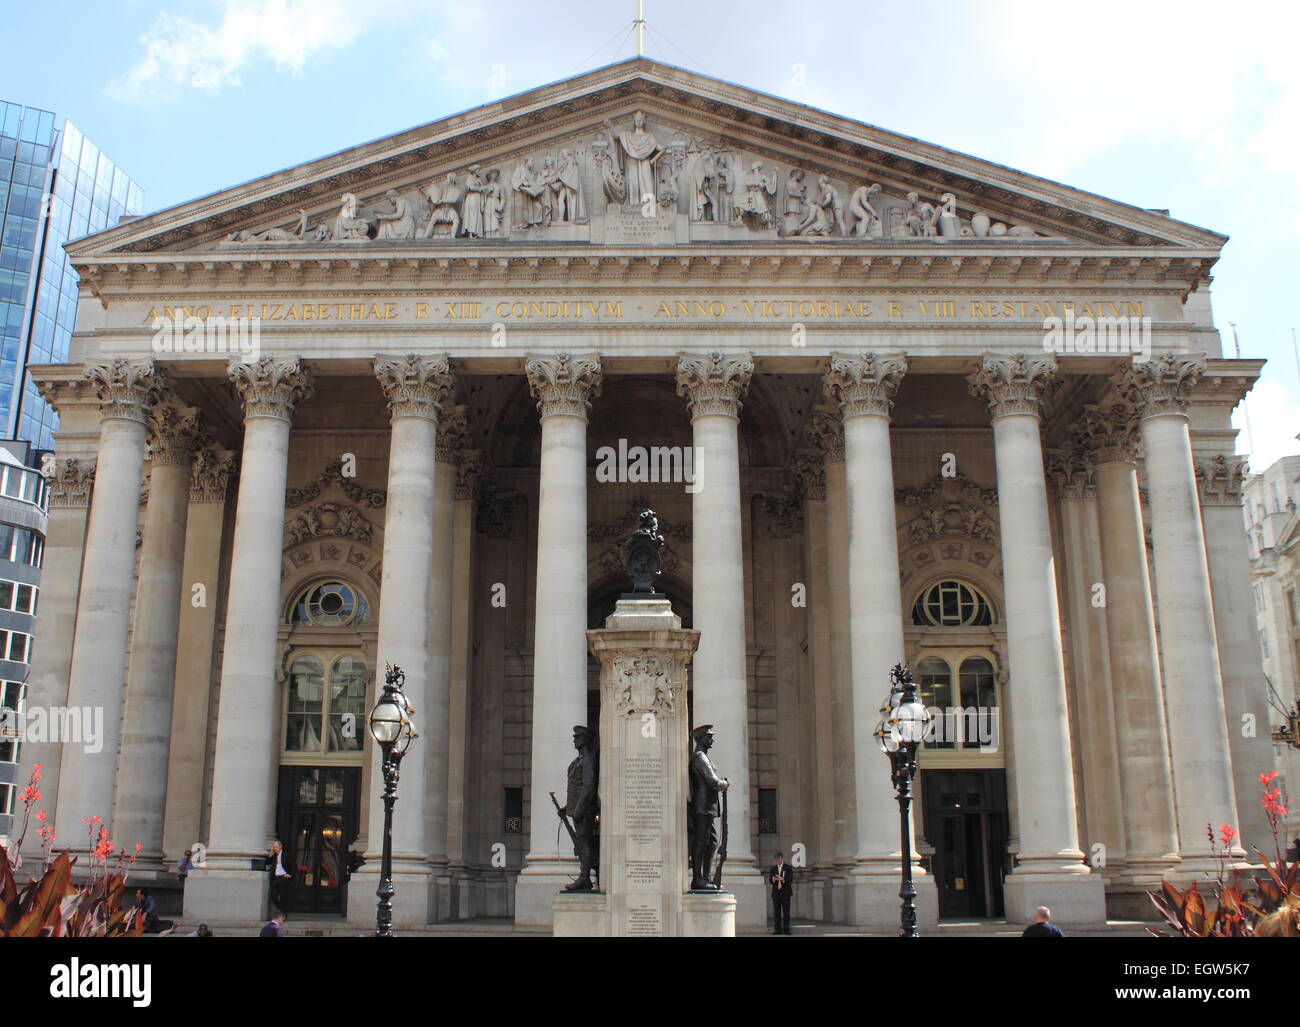 LONDON - AUGUST 7: The facade of Royal Exchange on August 7, 2014 in London, England Stock Photo